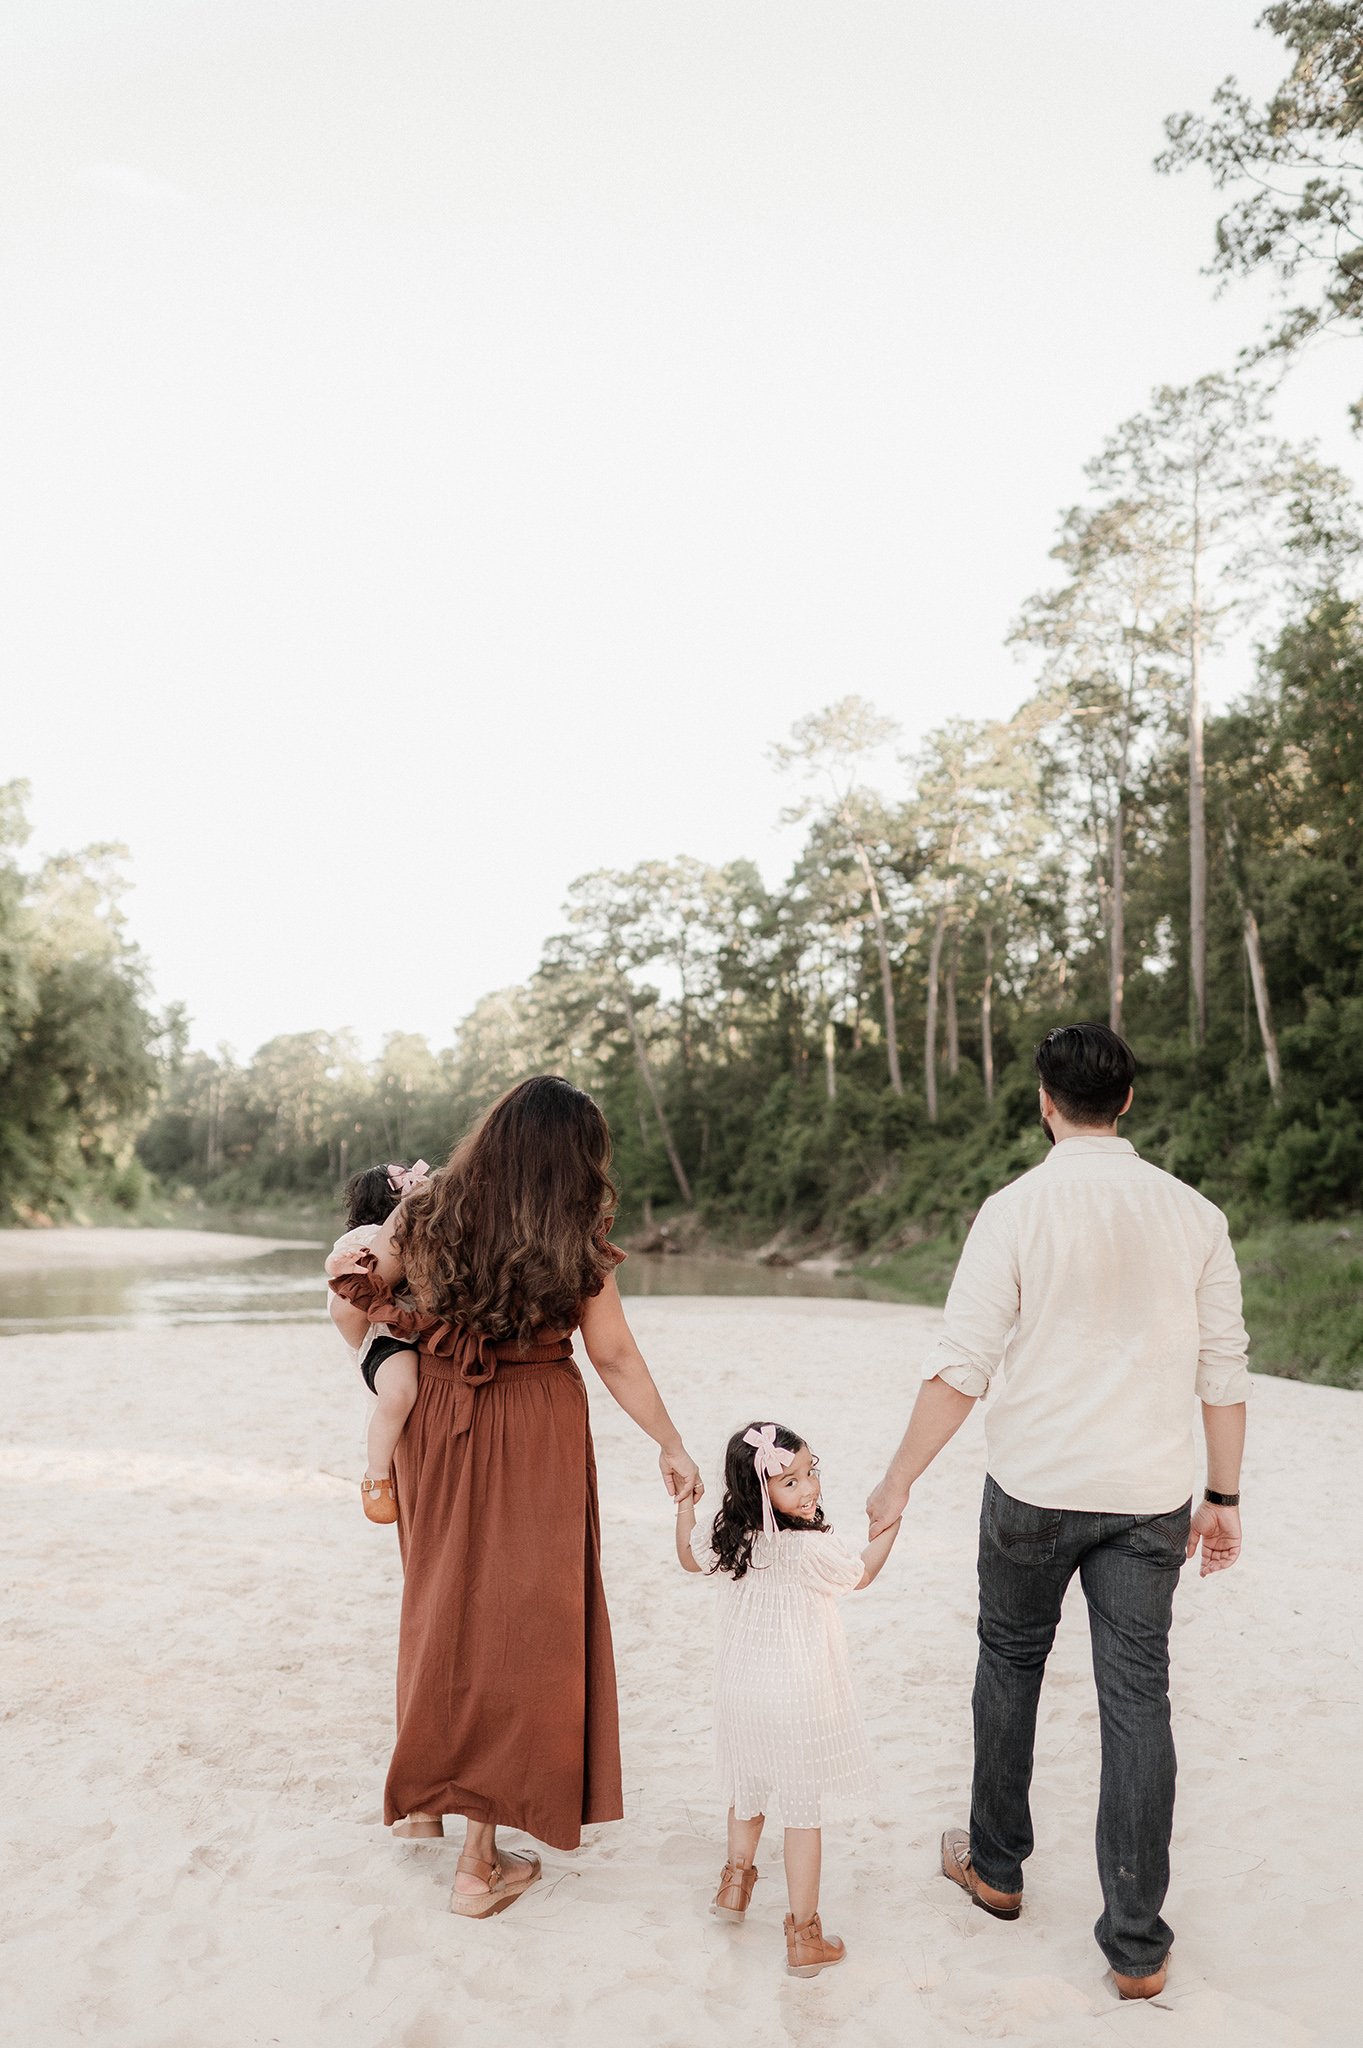 the woodlands family photographer _ conroe photographer _ houston family photographer _ ashley gillen photography _ texas family photographer _ conroe wedding photographer _ conroe texas _ cshi51.jpg